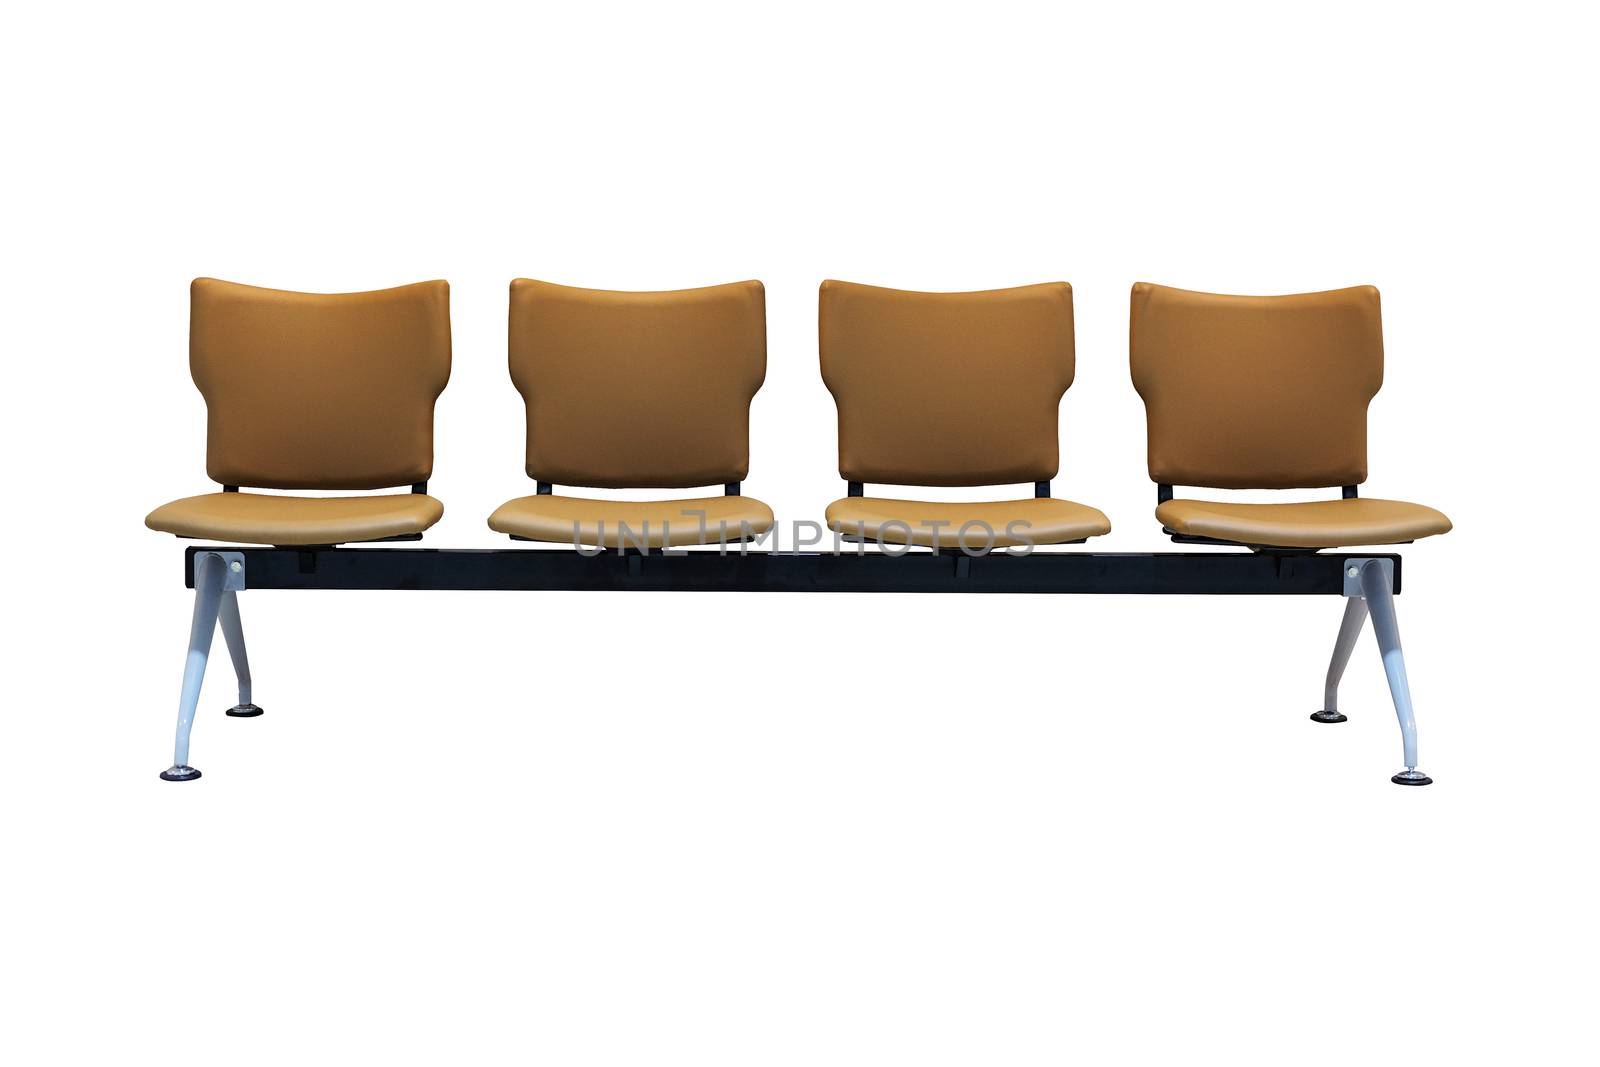 Waiting plastic chairs on white background with clipping path
